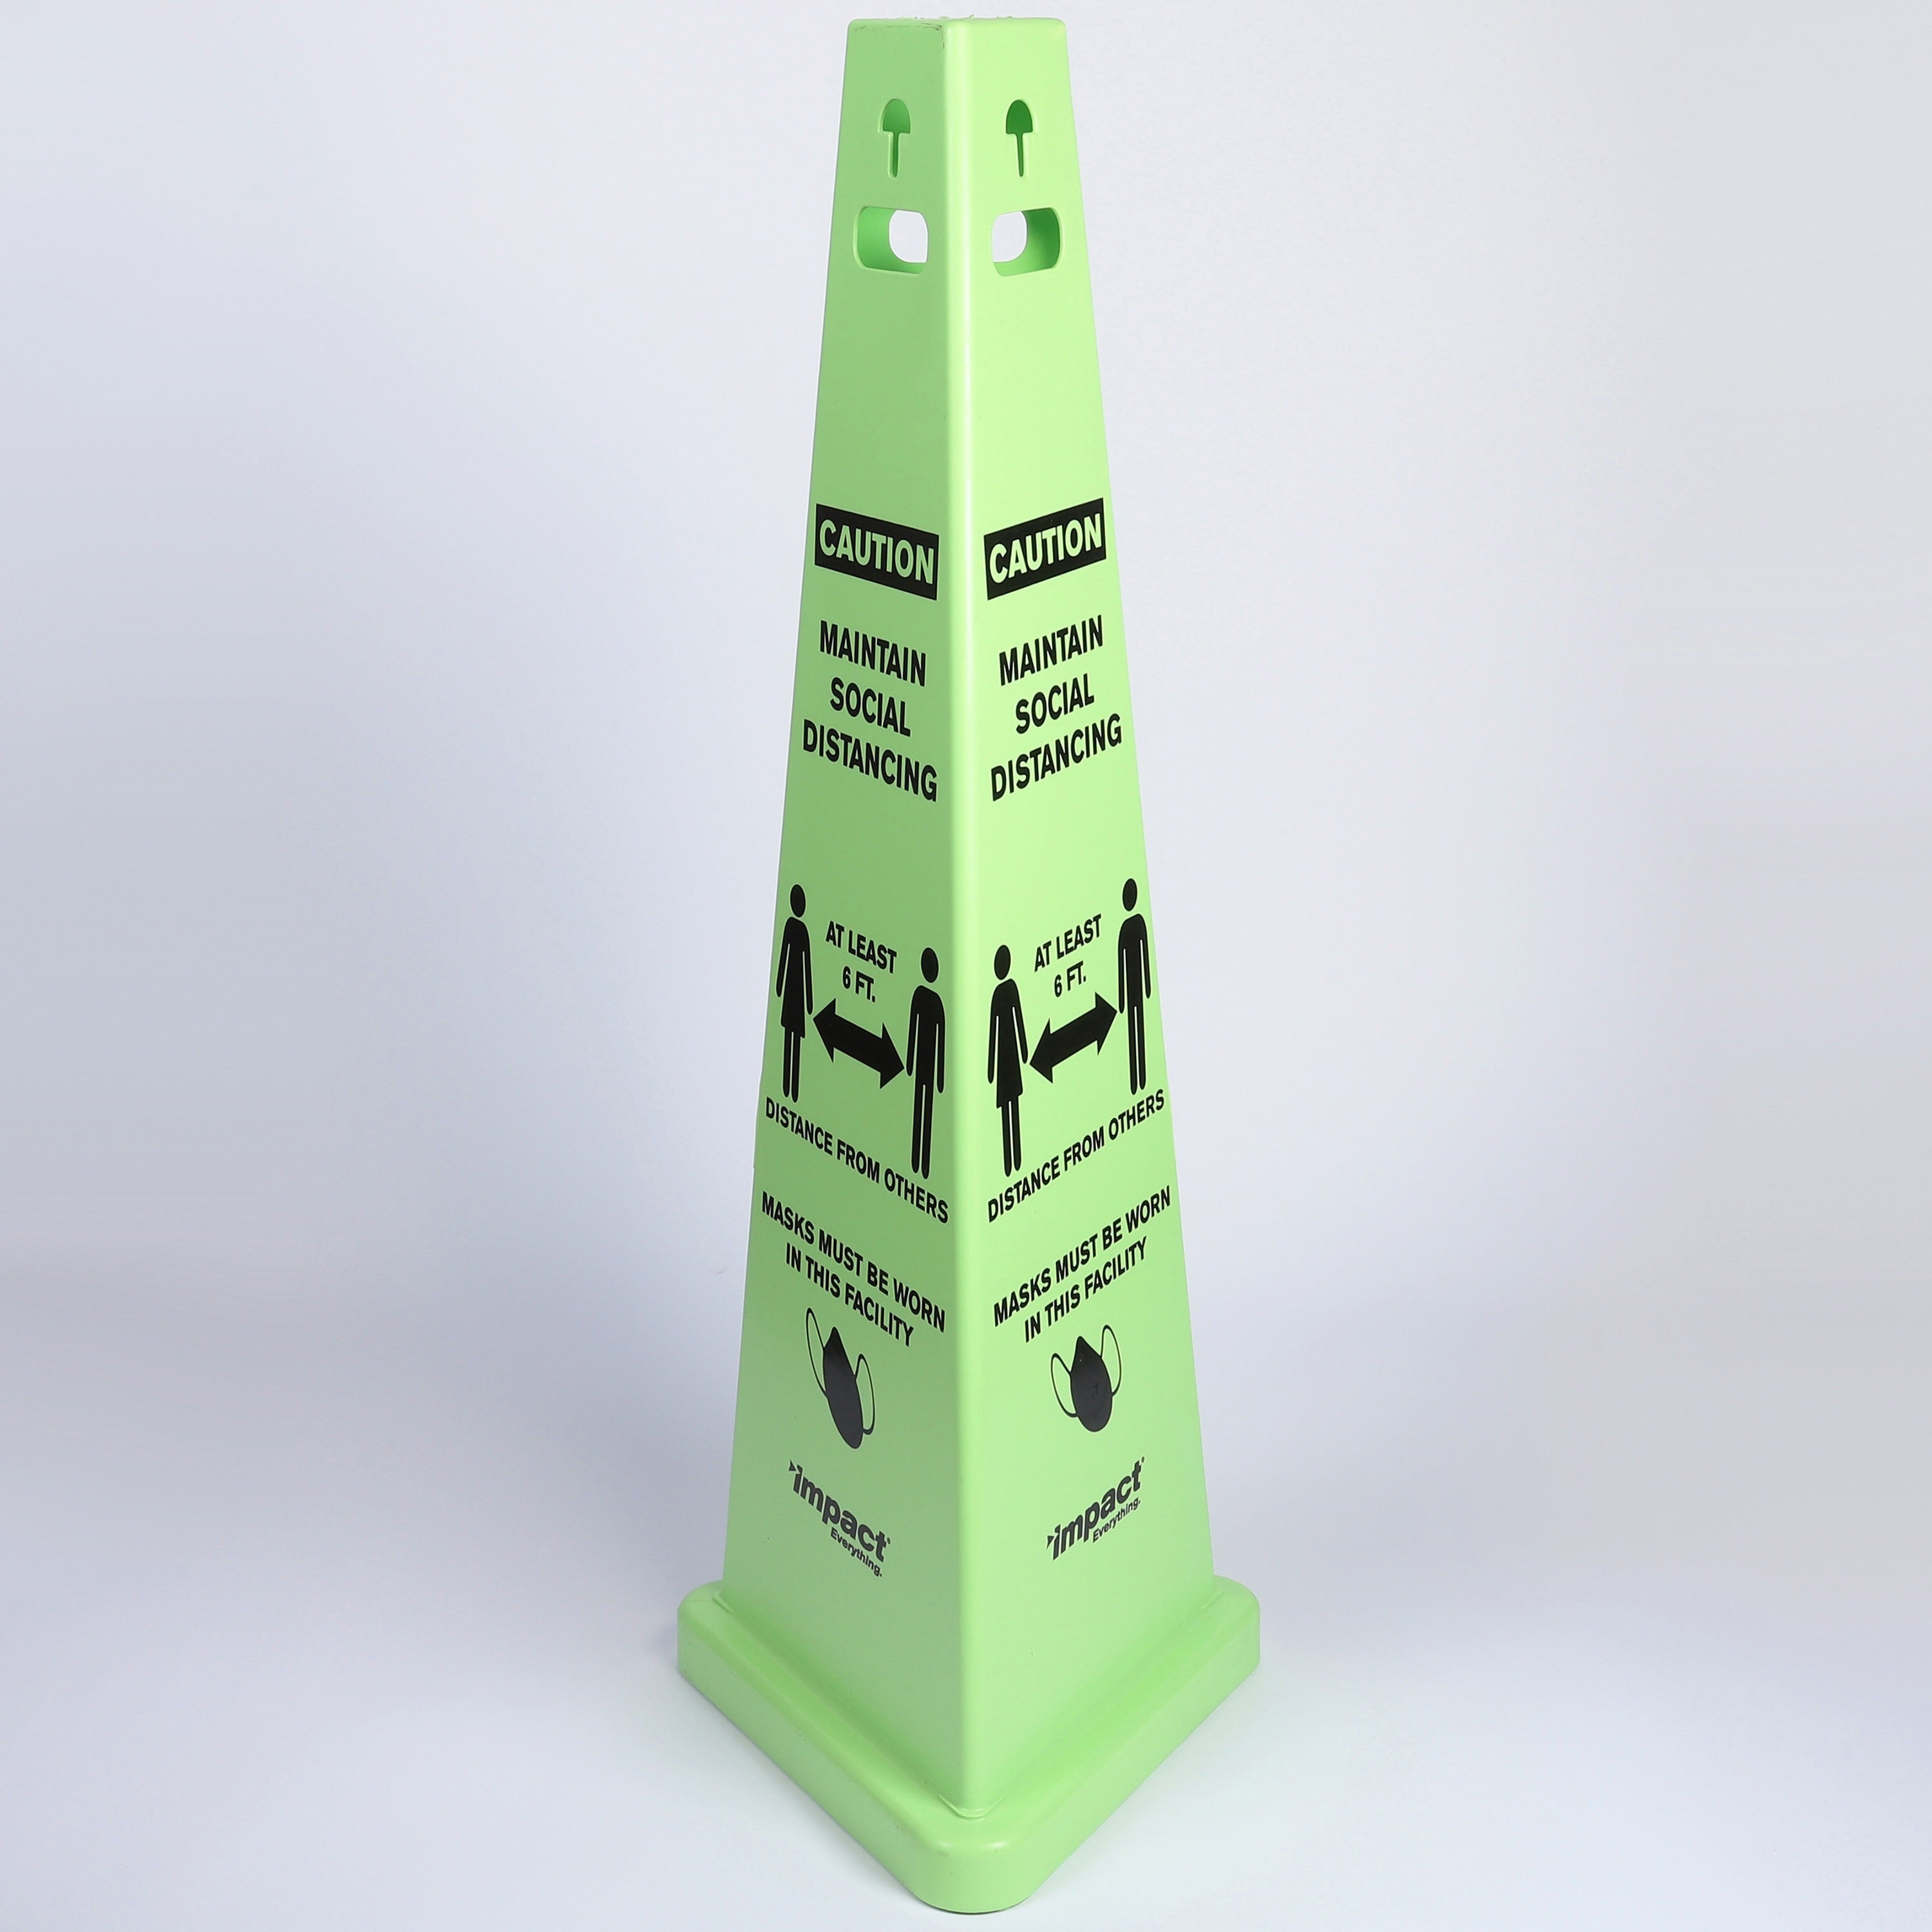 impact-trivu-social-distancing-3-sided-safety-cone-1-each-caution-maintain-social-distancing-print-message-40-height-x-148-depth-cone-shape-three-sided-uv-protected-plastic-fluorescent-yellow_imp9140sm - 2